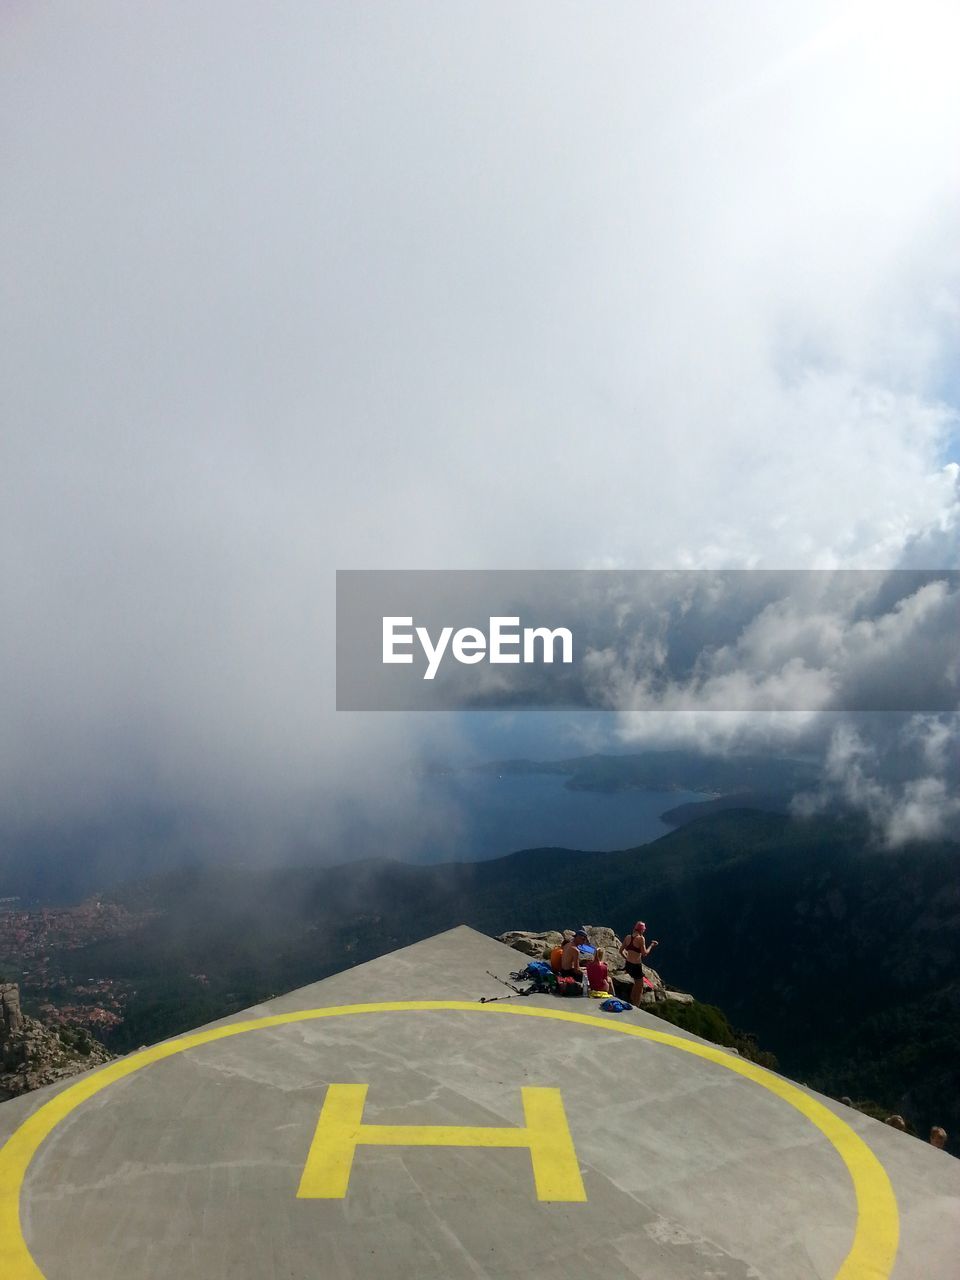 High angle view of friends at helipad on mountain during foggy weather